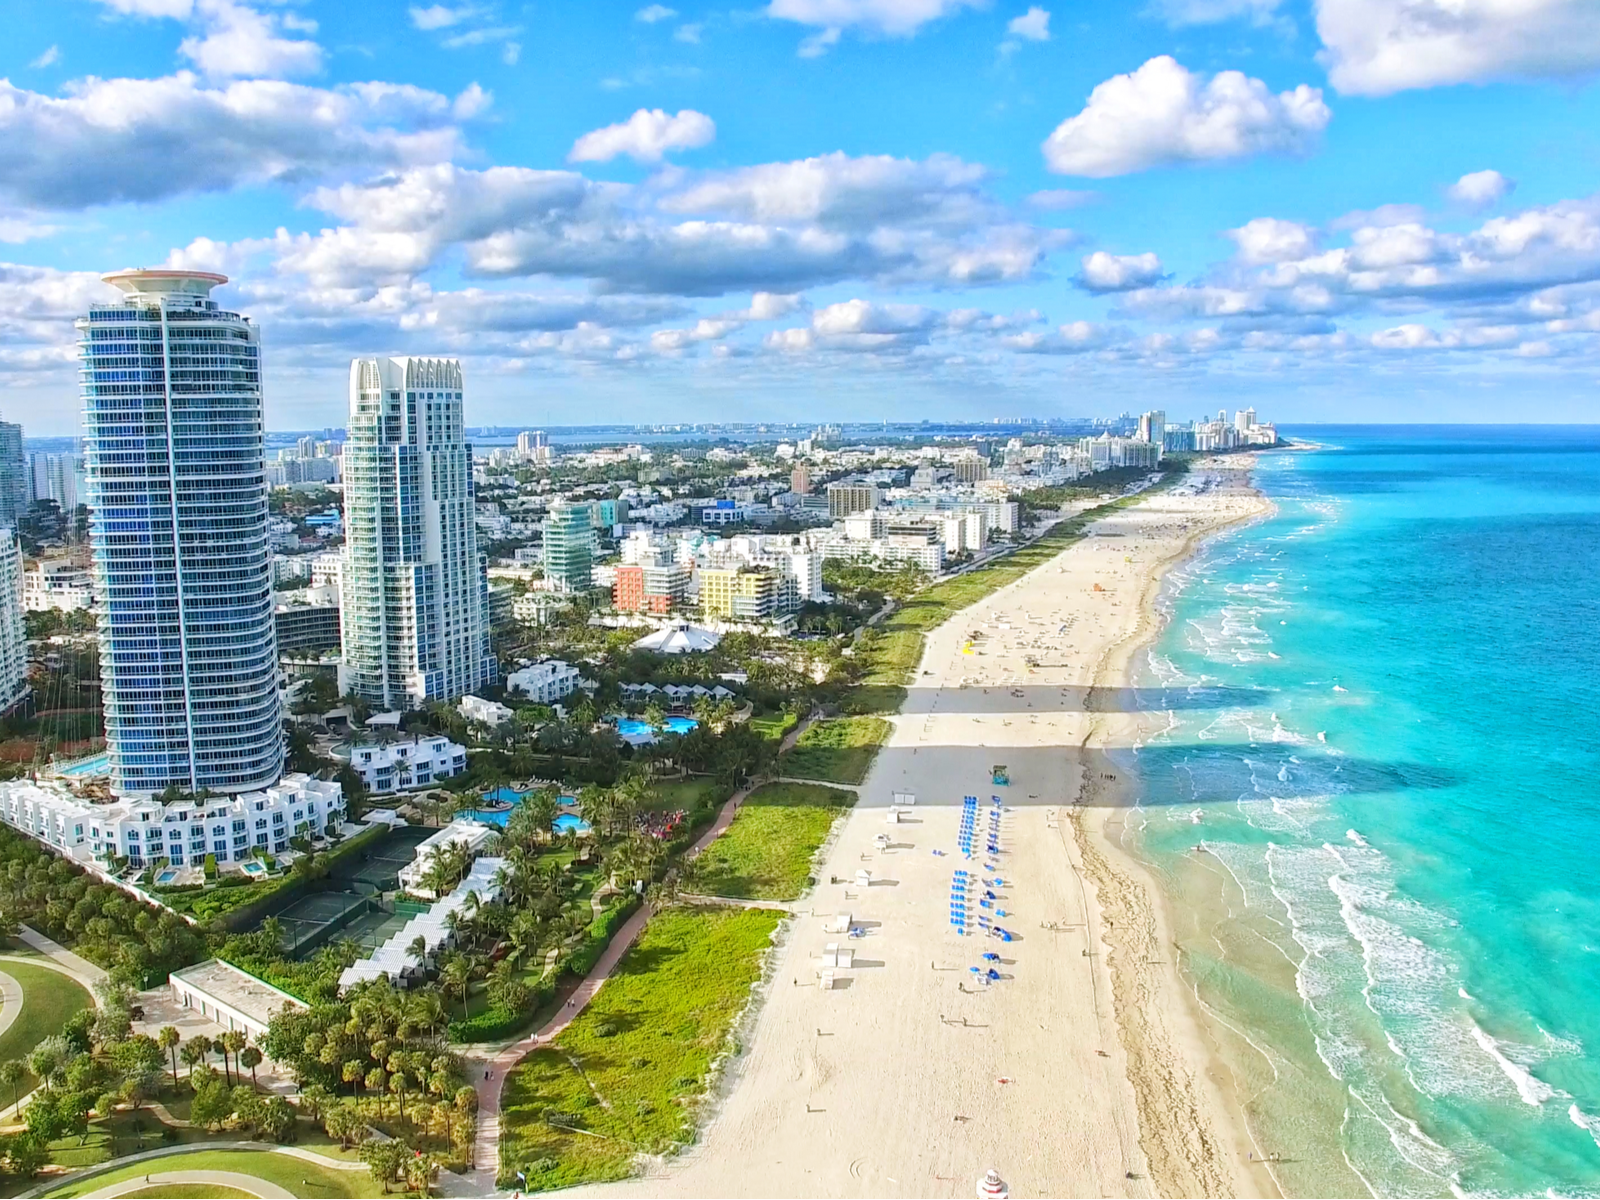 Arerial view on the vast shore of Miami Beach in Florida, considered as one of the best beaches on the East Coast, enjoyed by many visitors and series of big hotels along the beach